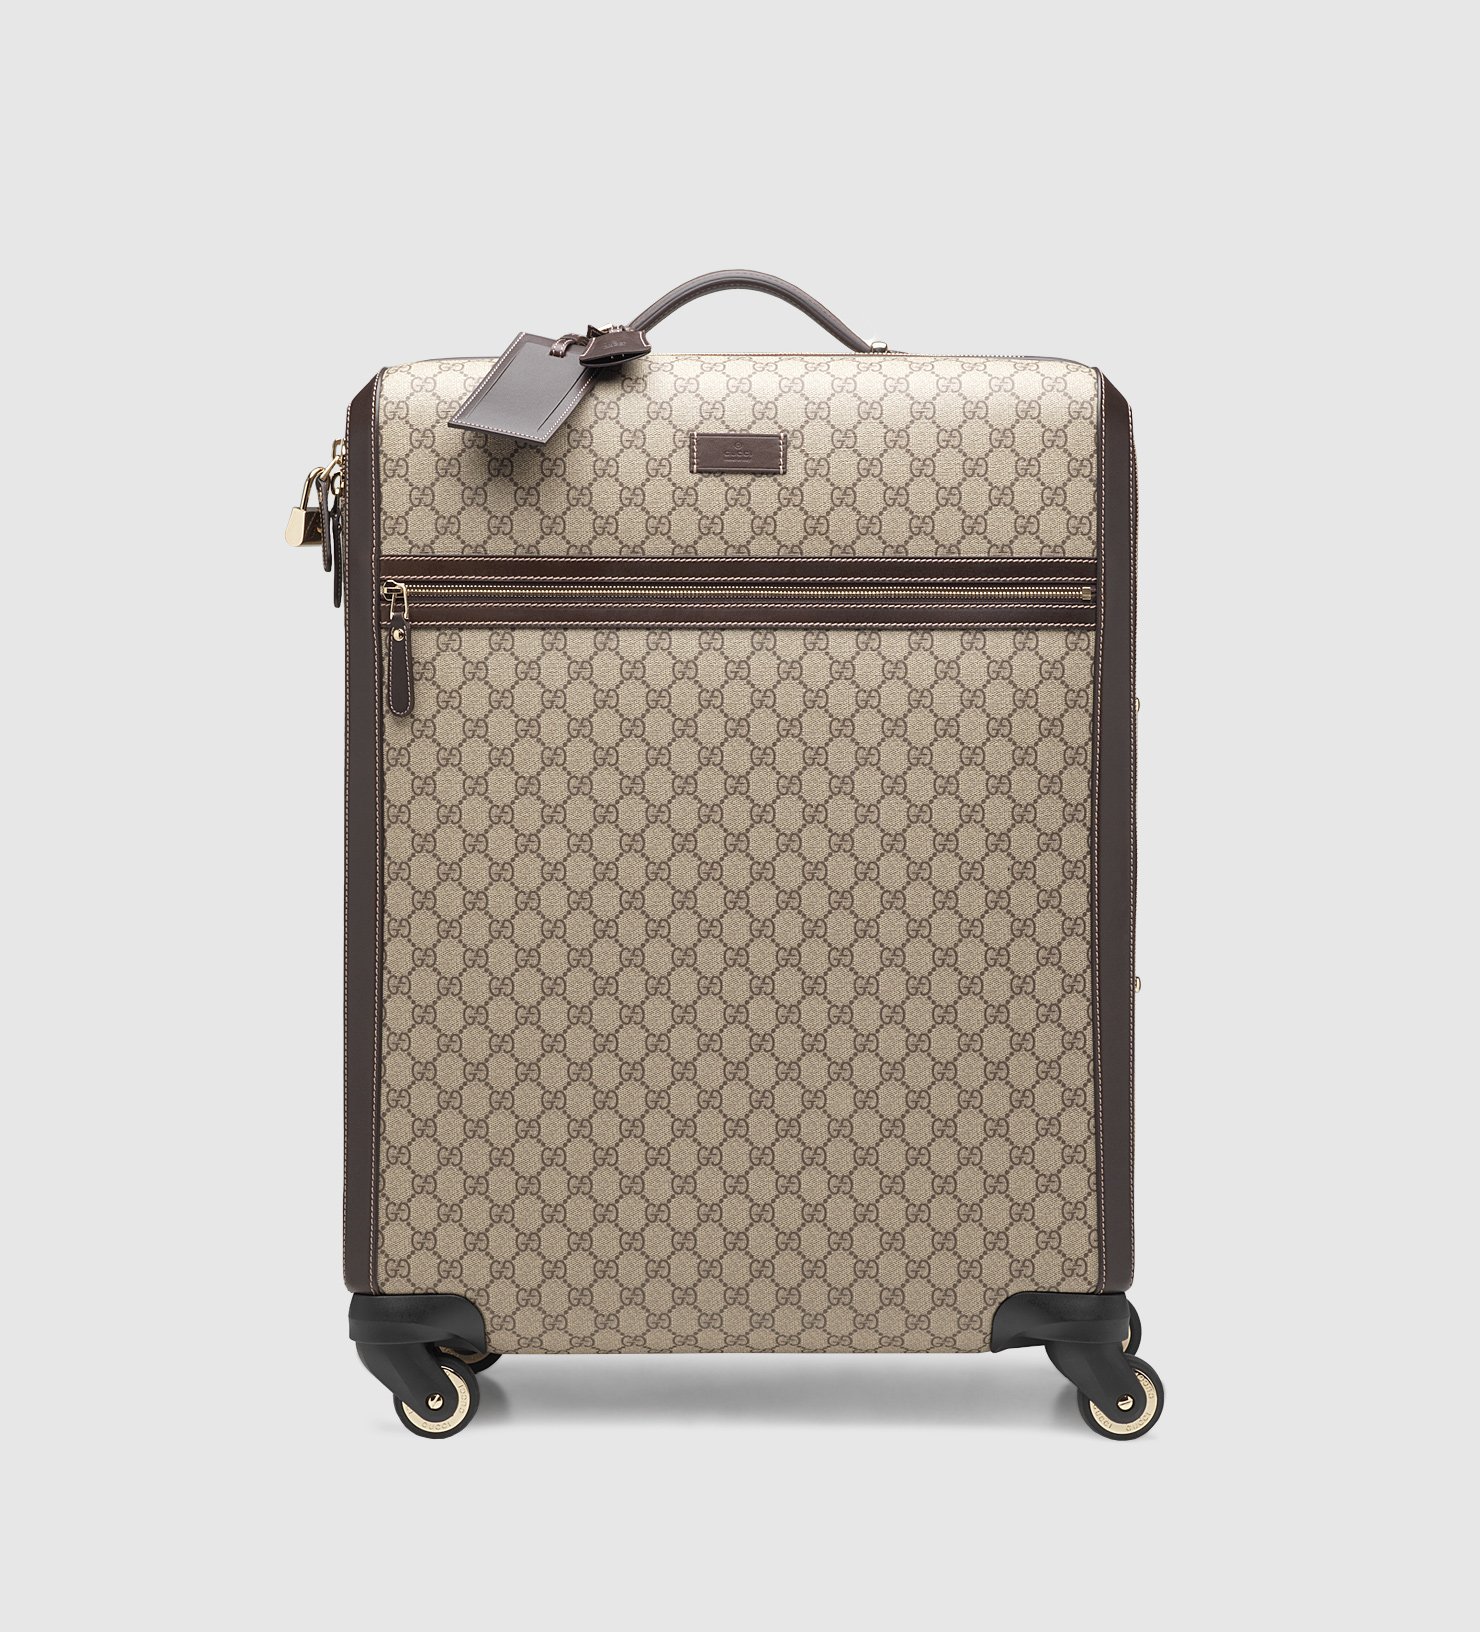 Lyst - Gucci Gg Supreme Canvas Four Wheel Suitcase in Black